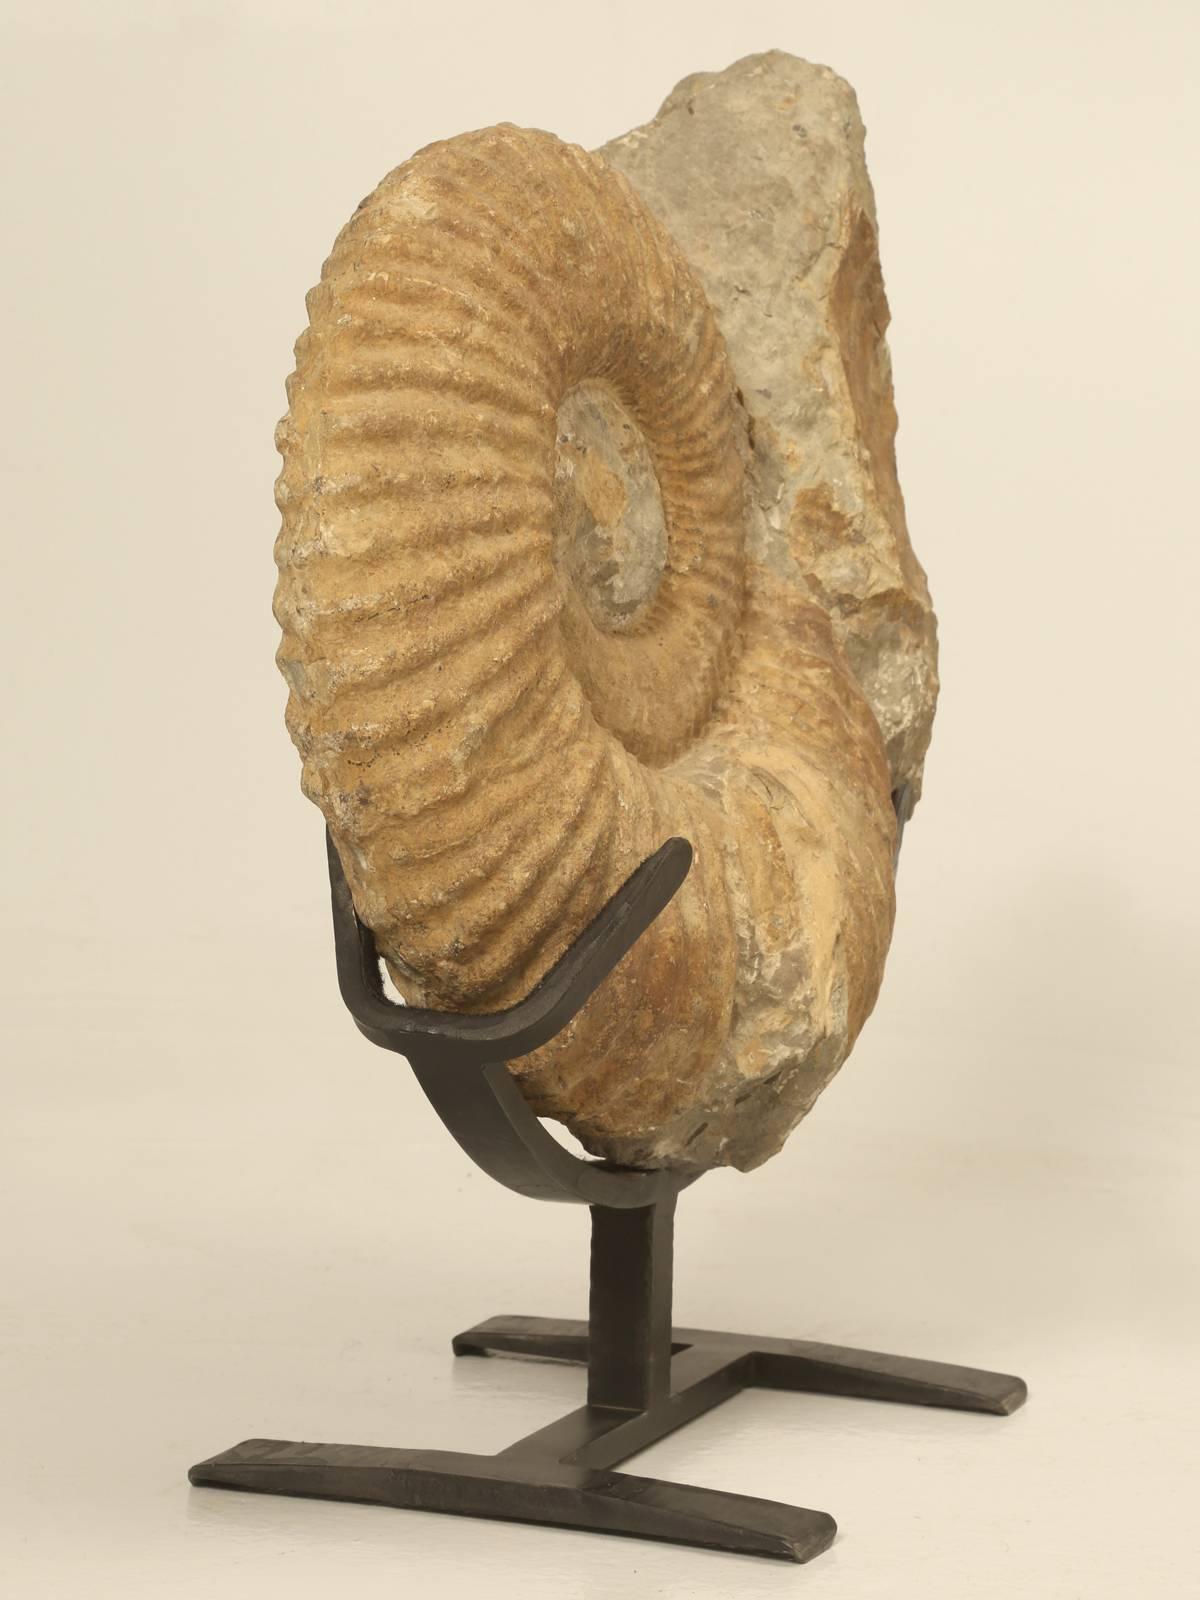 Ammonites are invertebrates and extinct members of the subclass Ammonoidea, class Cephalopoda. Ammonites began appearing during the Middle Devonian period about 400 million years ago that were mollusks, with shells that were tightly coiled on a